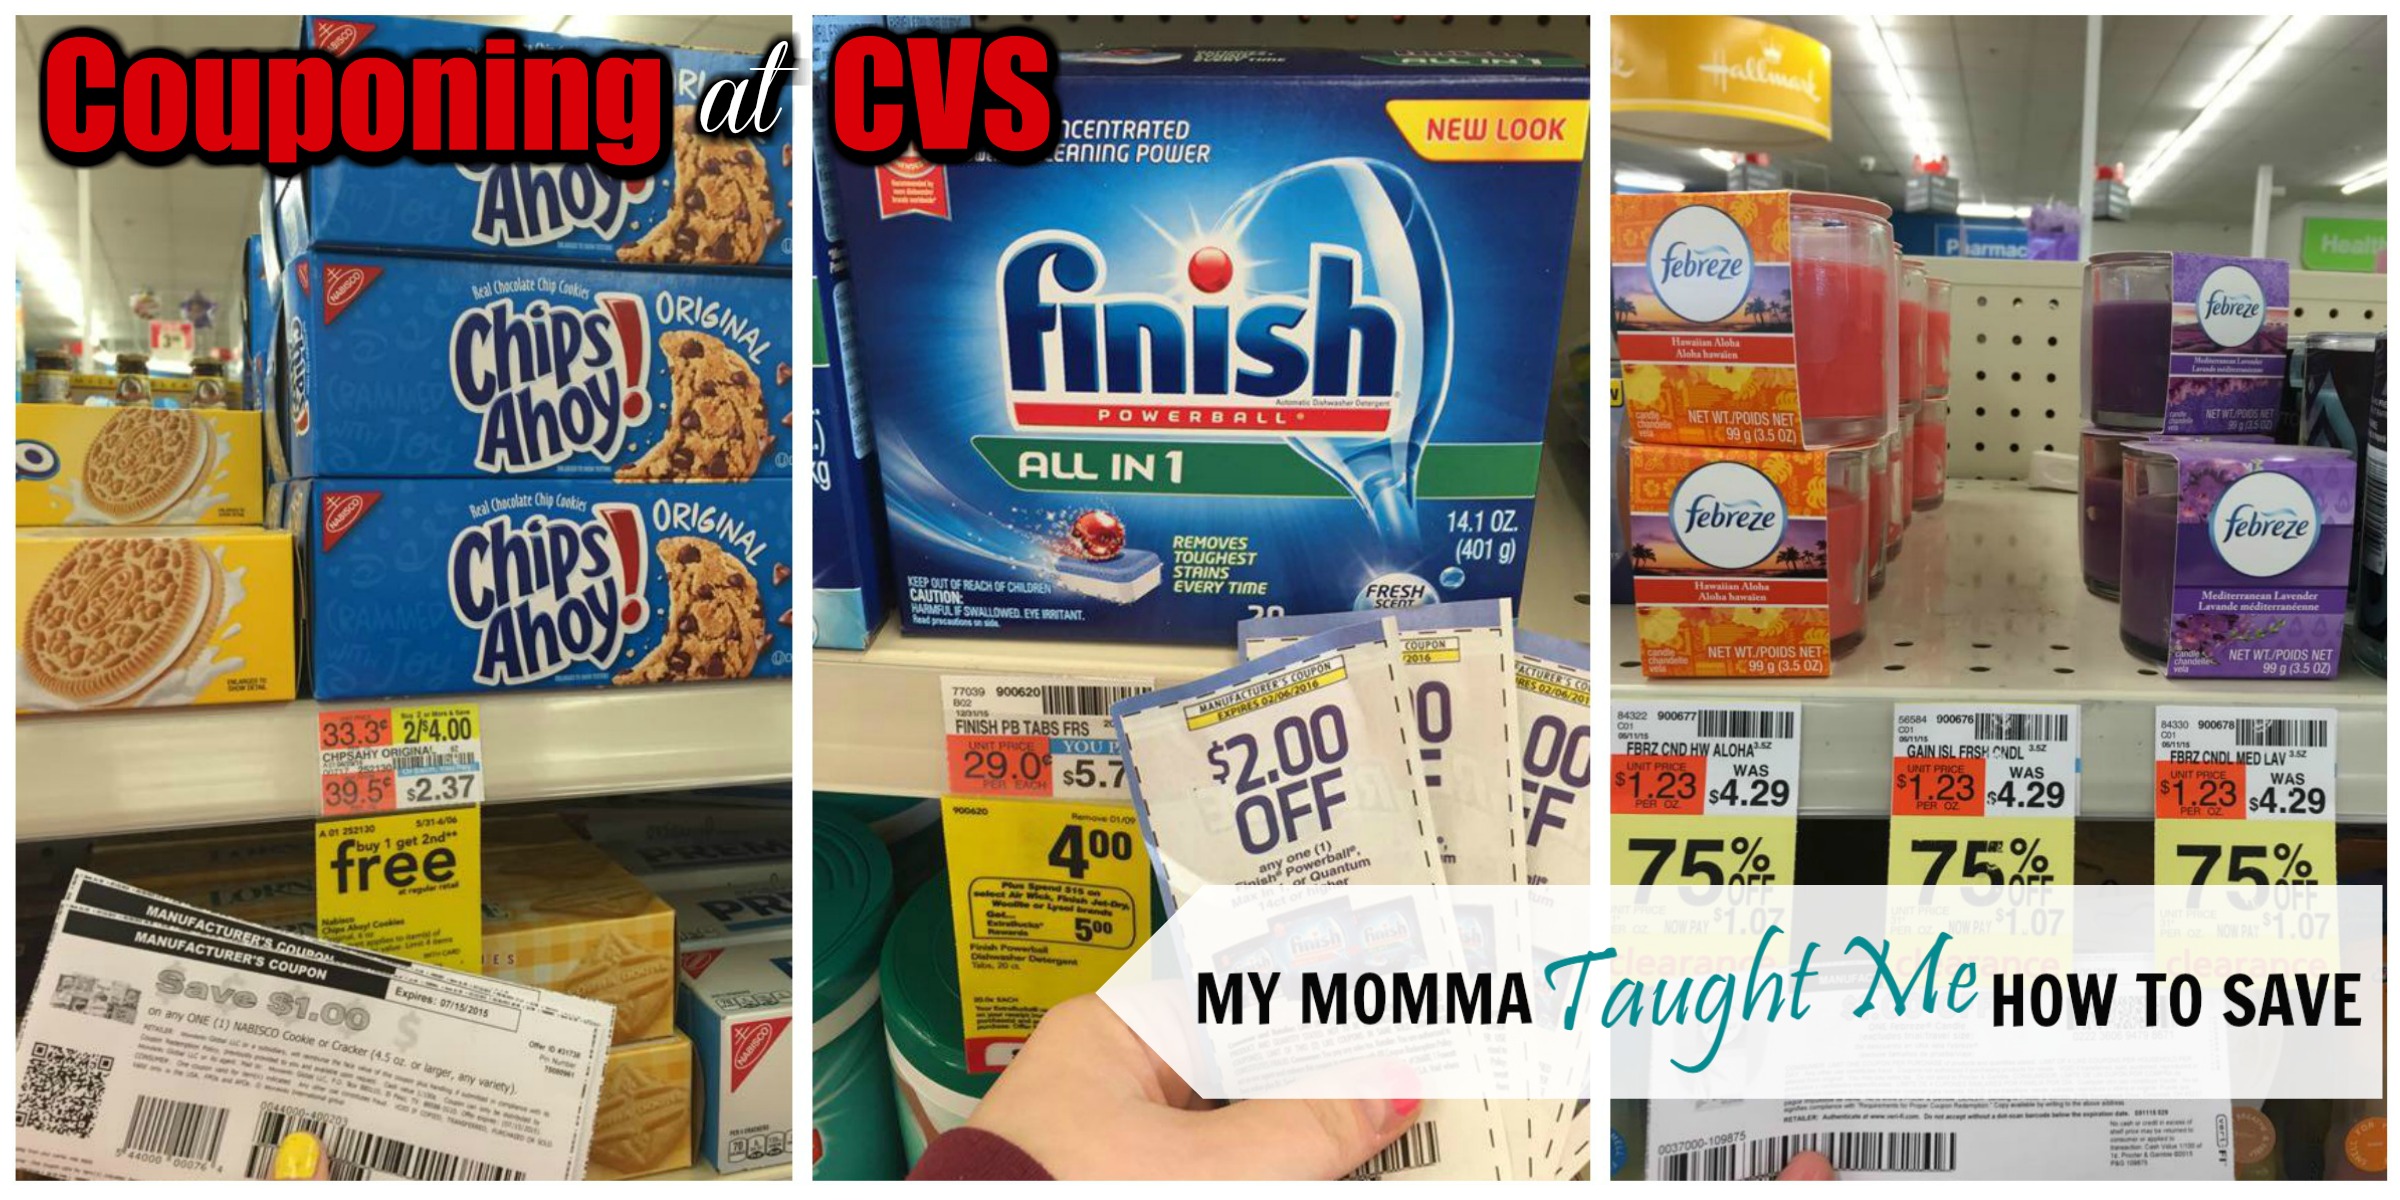 Couponing At CVS With My Momma Taught Me